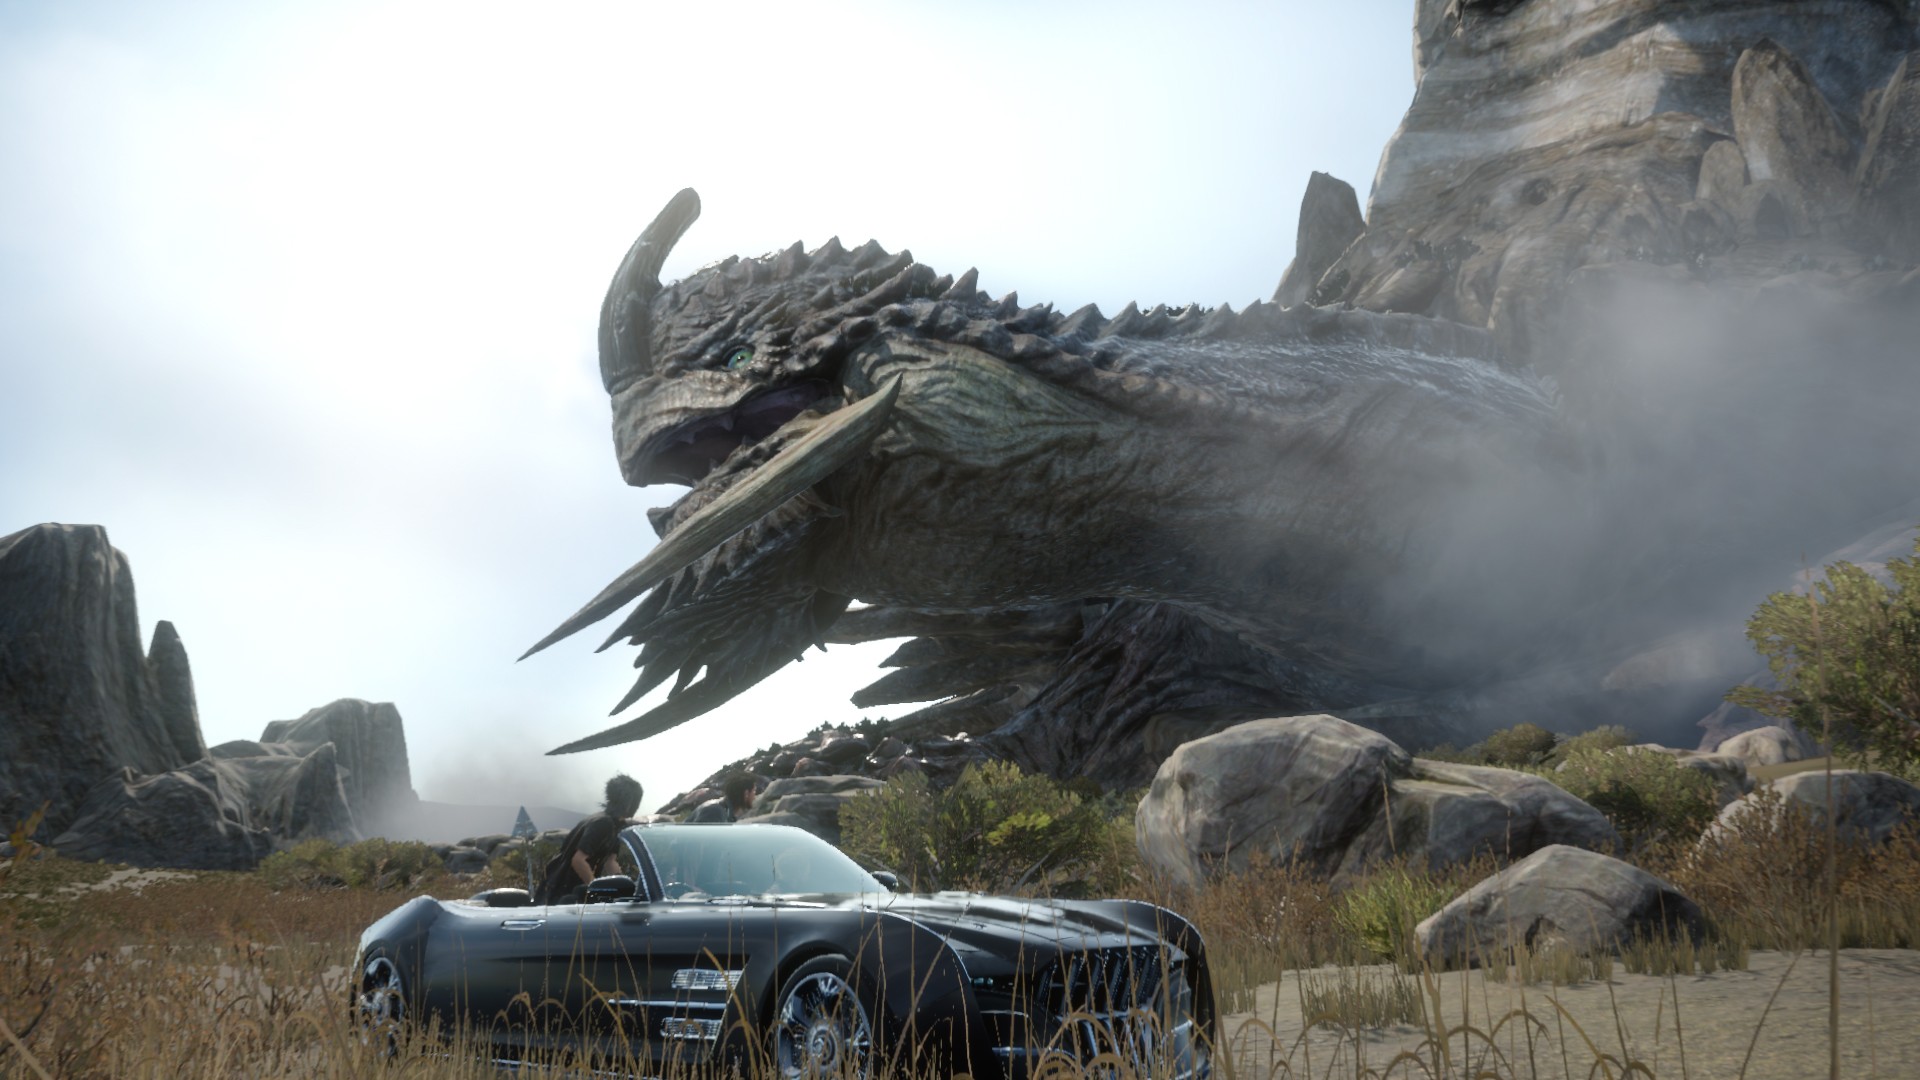 Final-Fantasy-XV-Demo-Confirmed-New-TGS-2014-Trailer-Out-459155-3.jpg